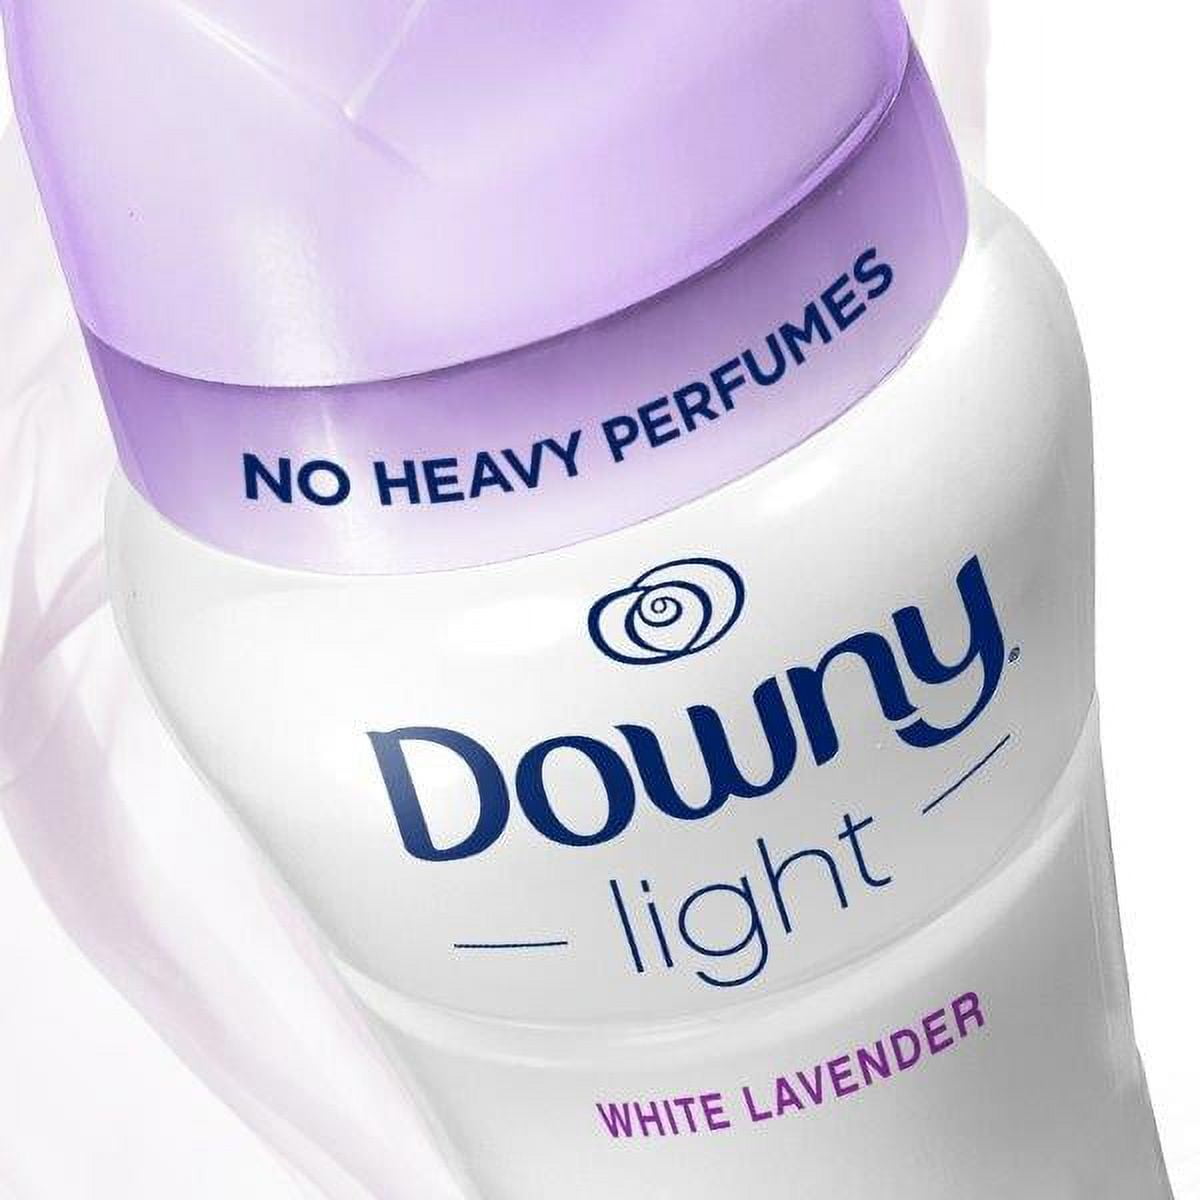 Downy Light Laundry Scent Booster Beads for Washer, White Lavender, 24 oz, with No Heavy Perfumes